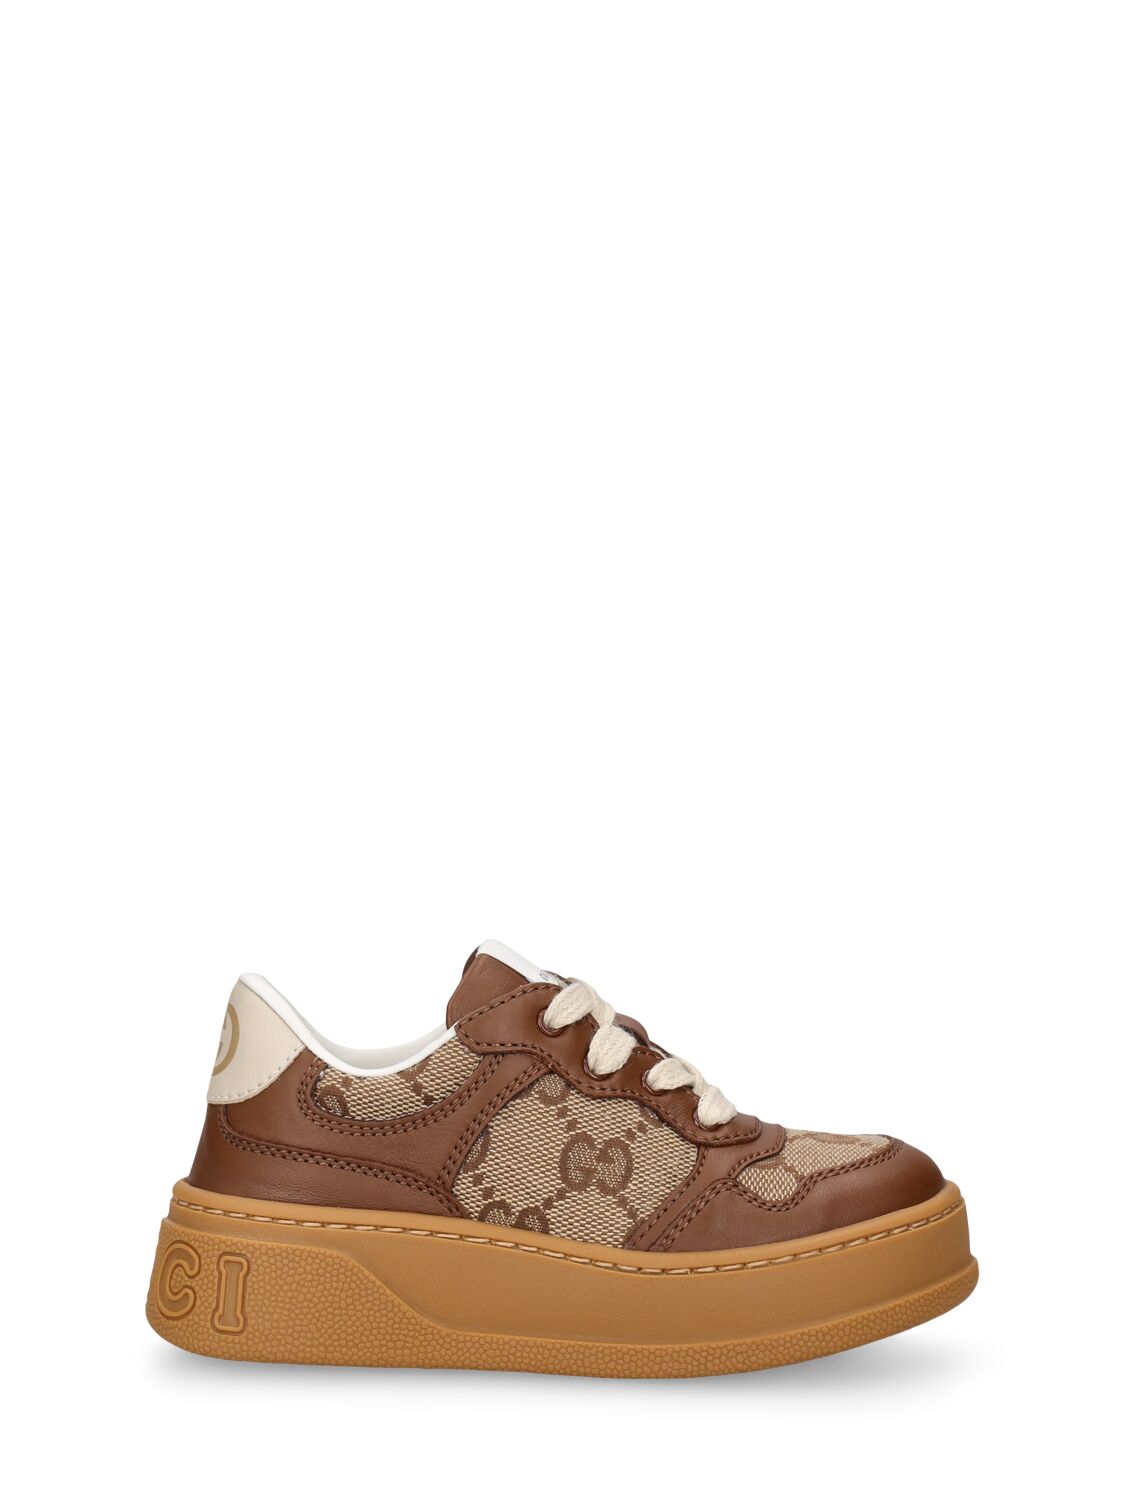 Image of Gg Canvas & Leather Sneakers